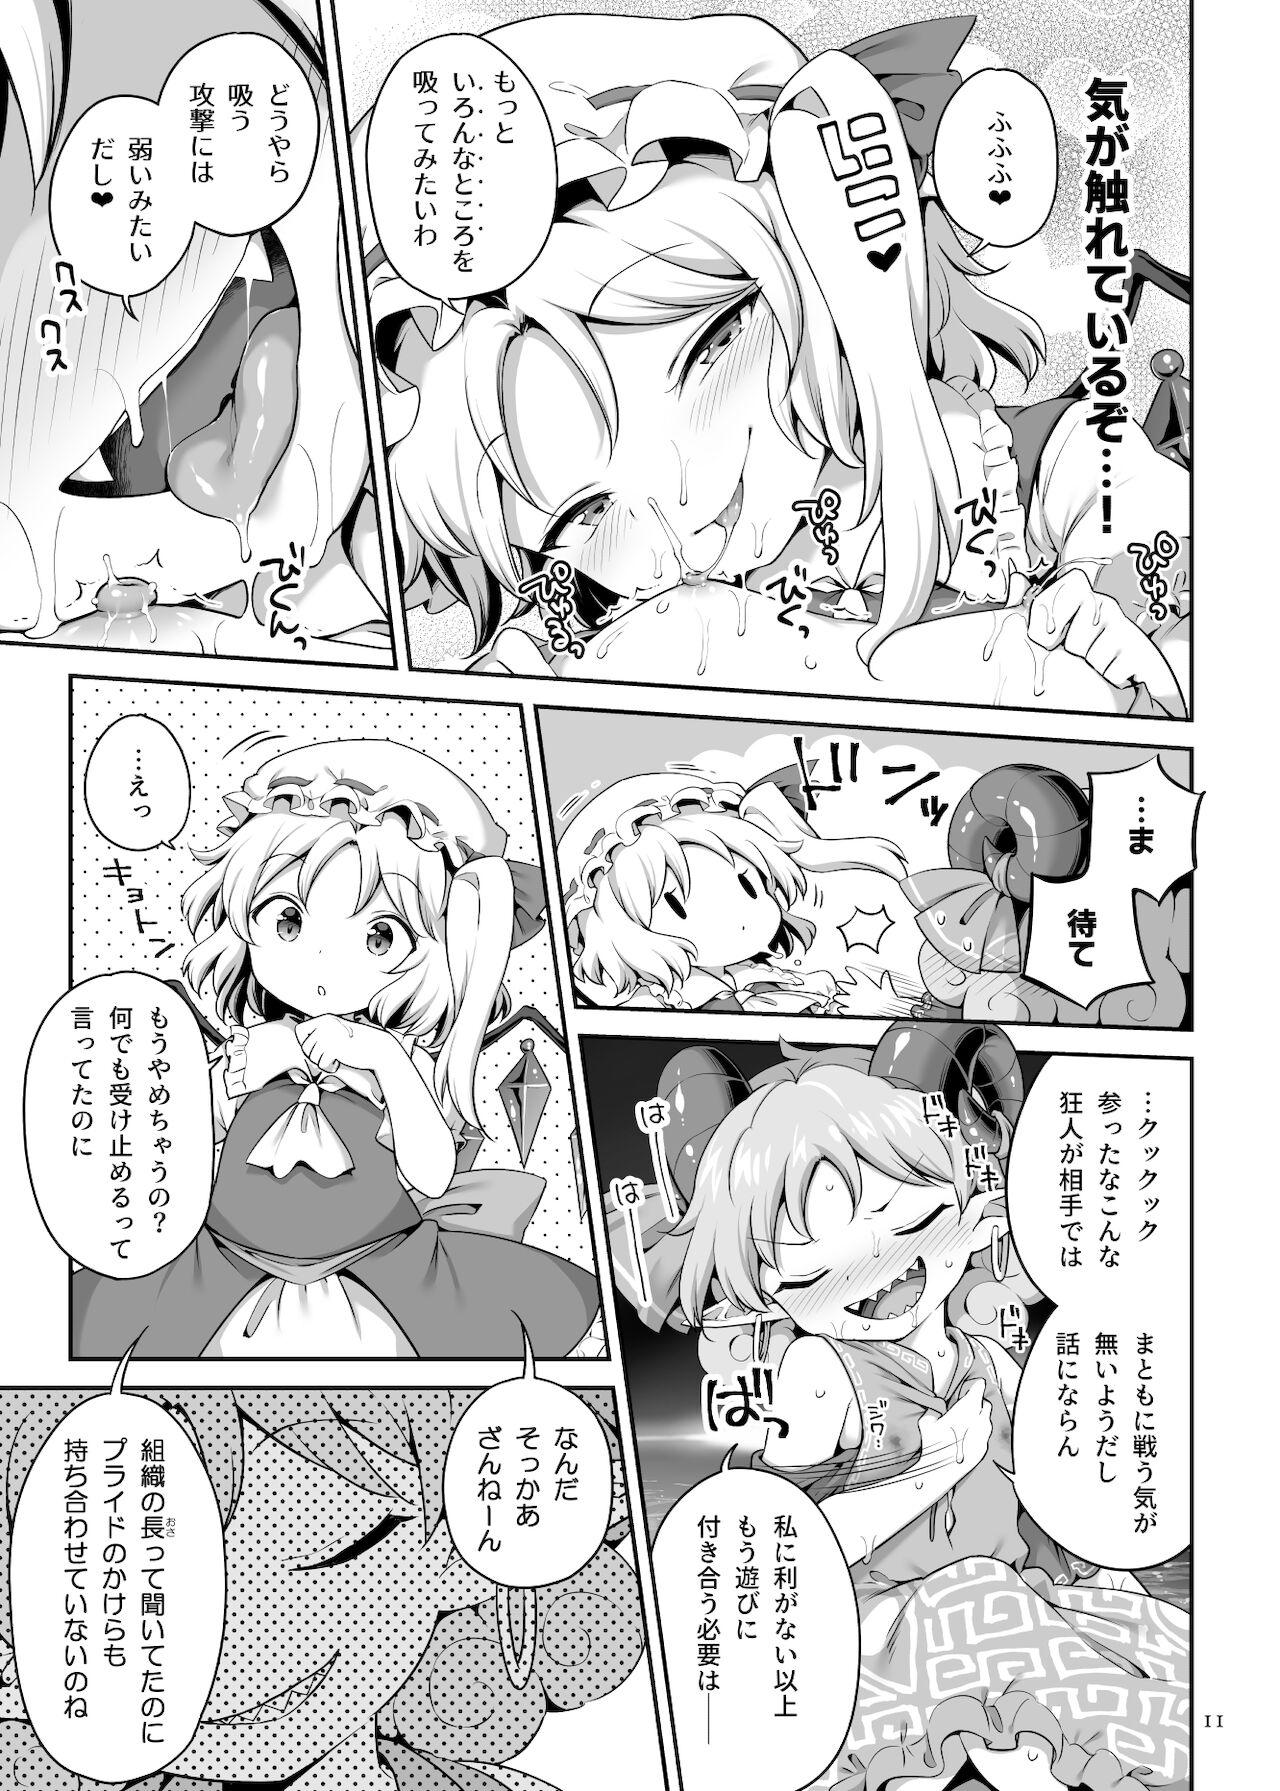 Toys 吸われて駄目なら吸ってみろ! - Touhou project Gay Straight - Page 11